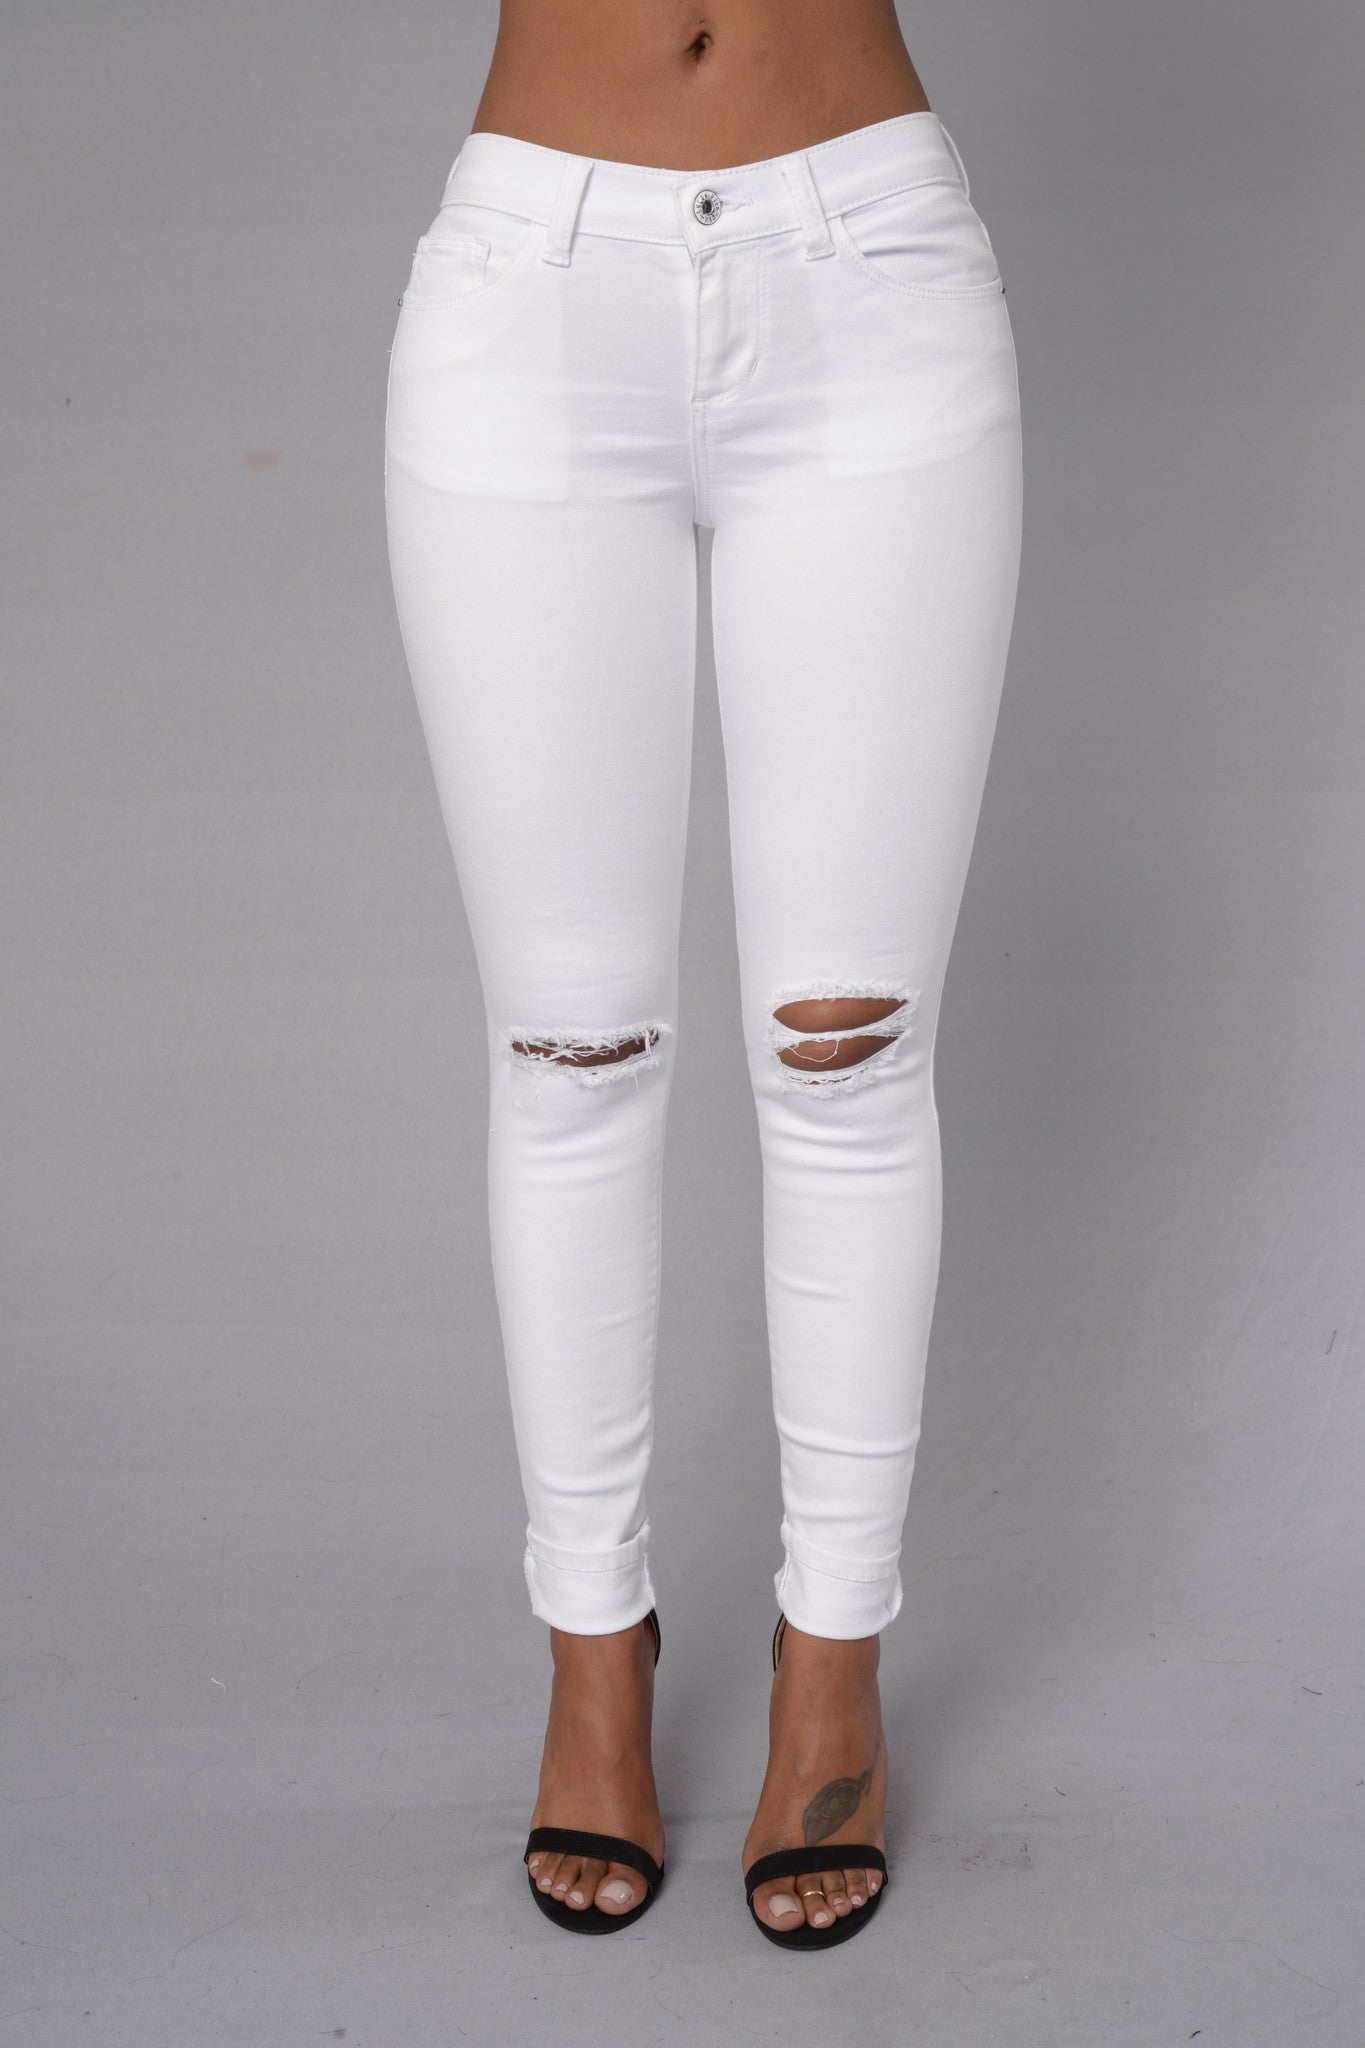 Suns Out Knees Out Jeans - White